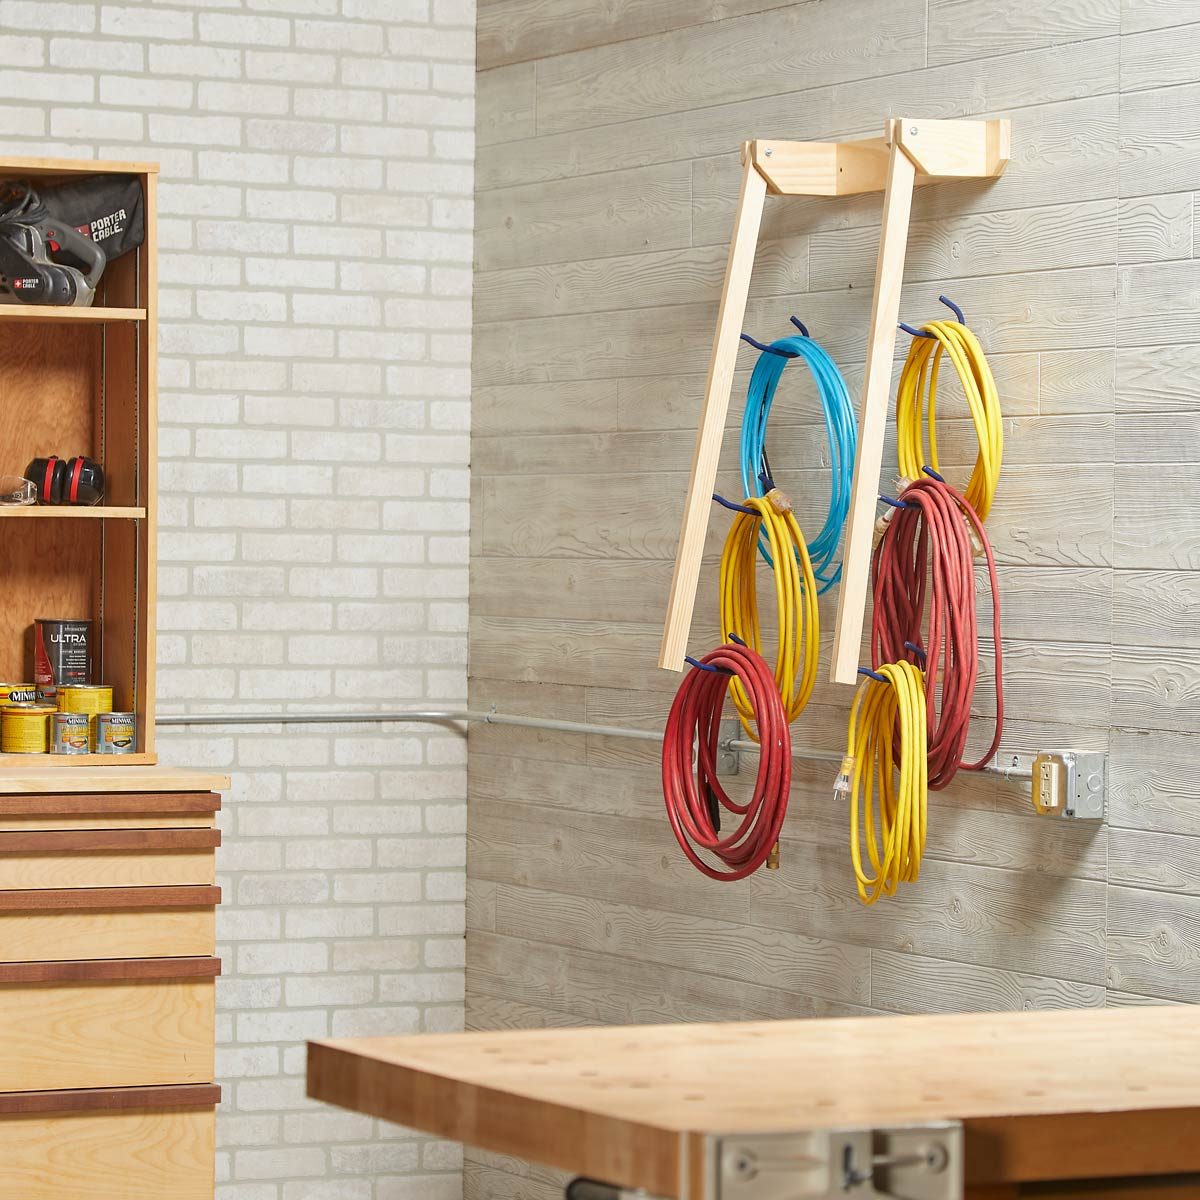 24 Garage Storage Projects You, Shelving That Doesn T Damage Walls